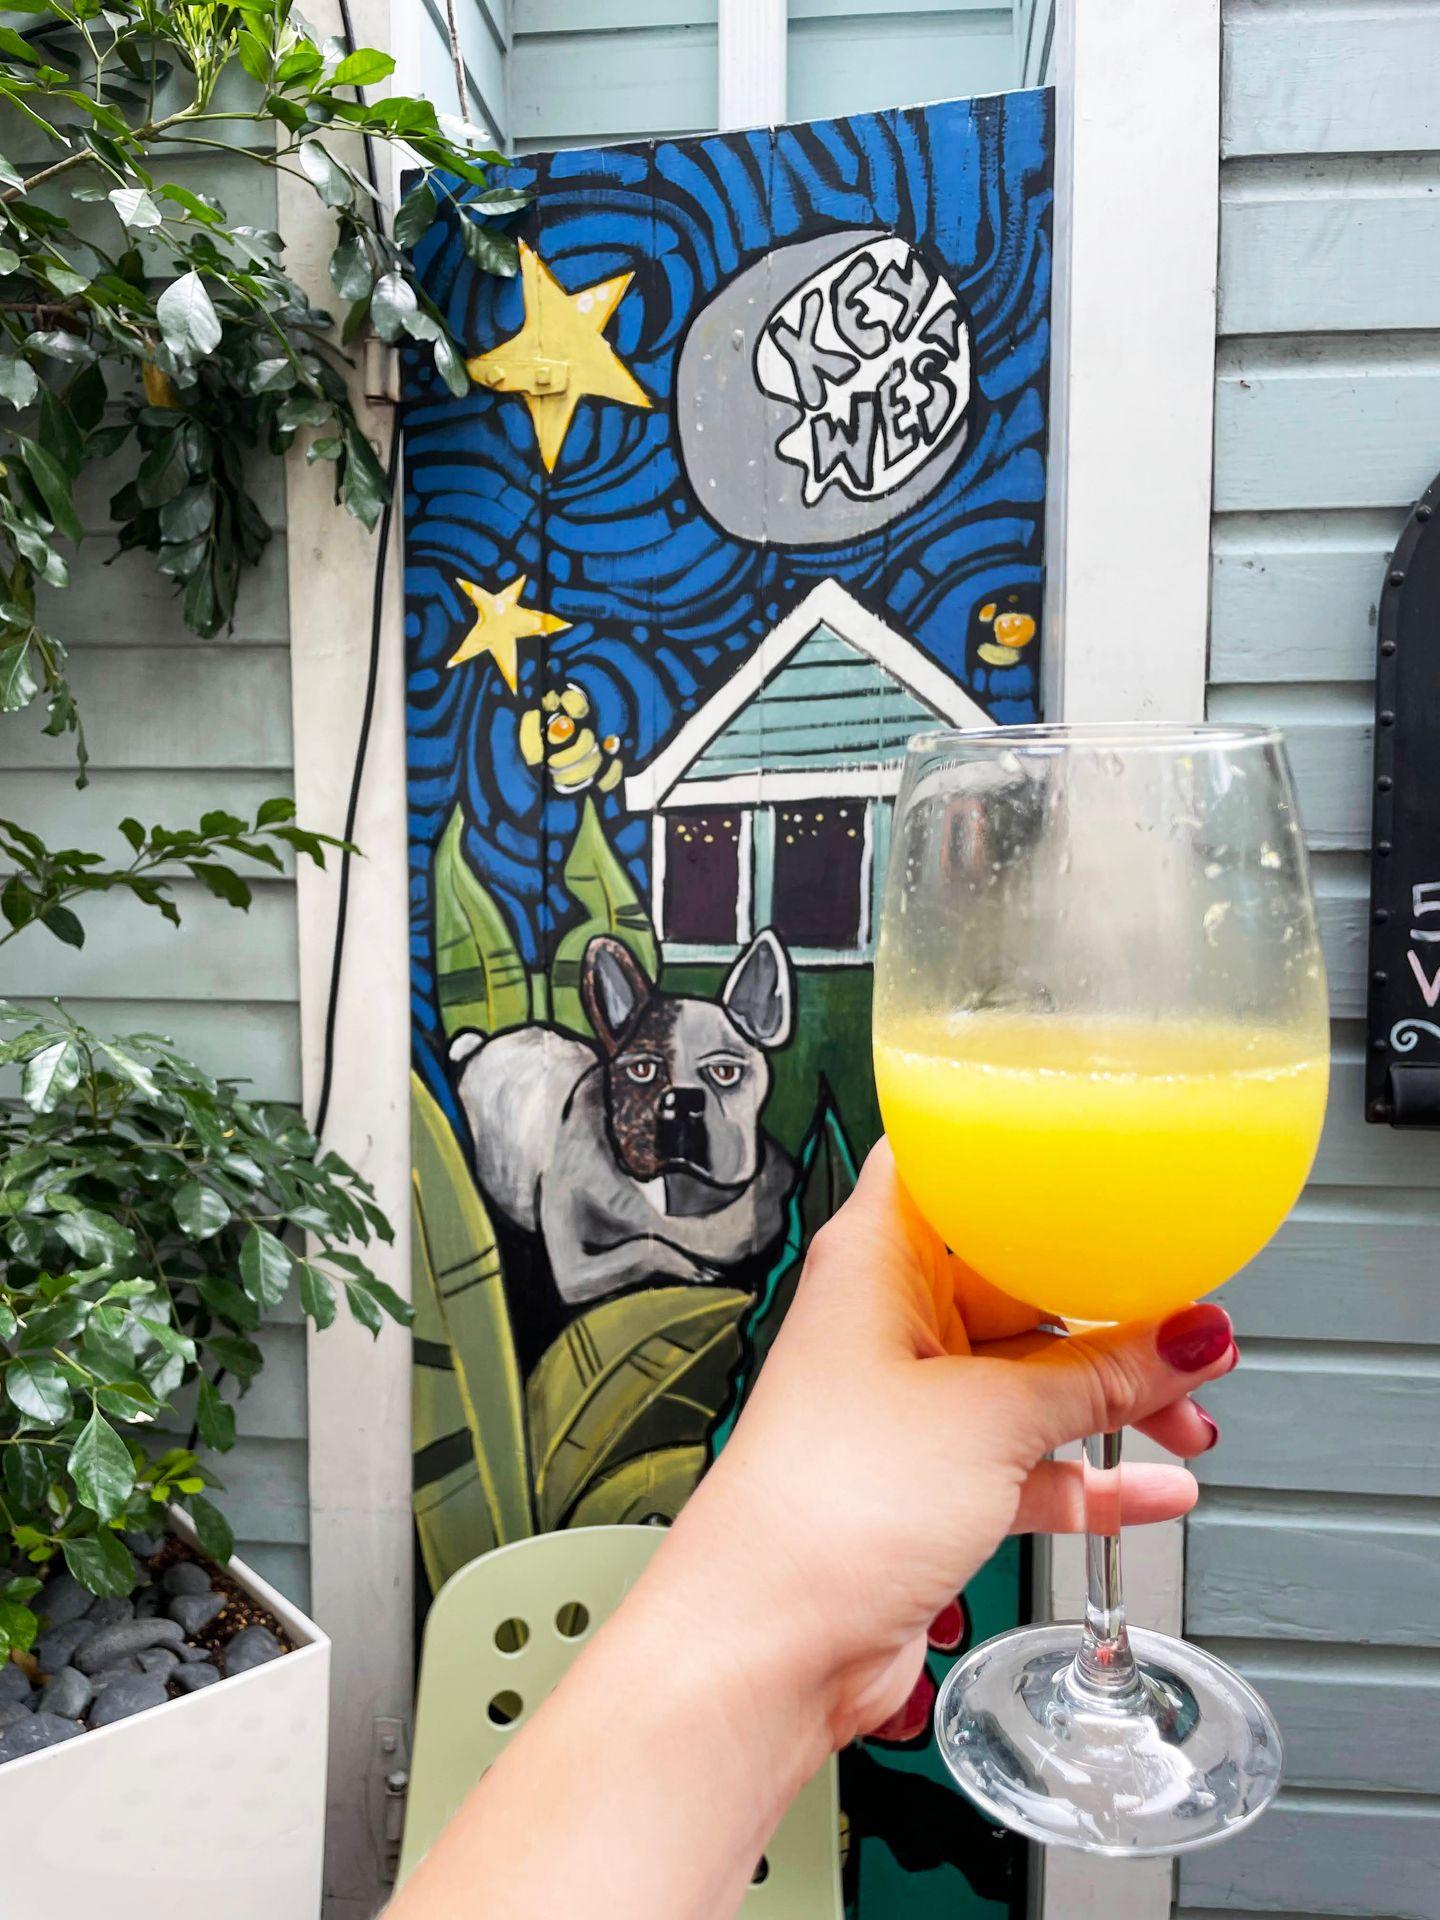 A mimosa being held up in front of a mural with a dog, a house and the words Key West in the sky